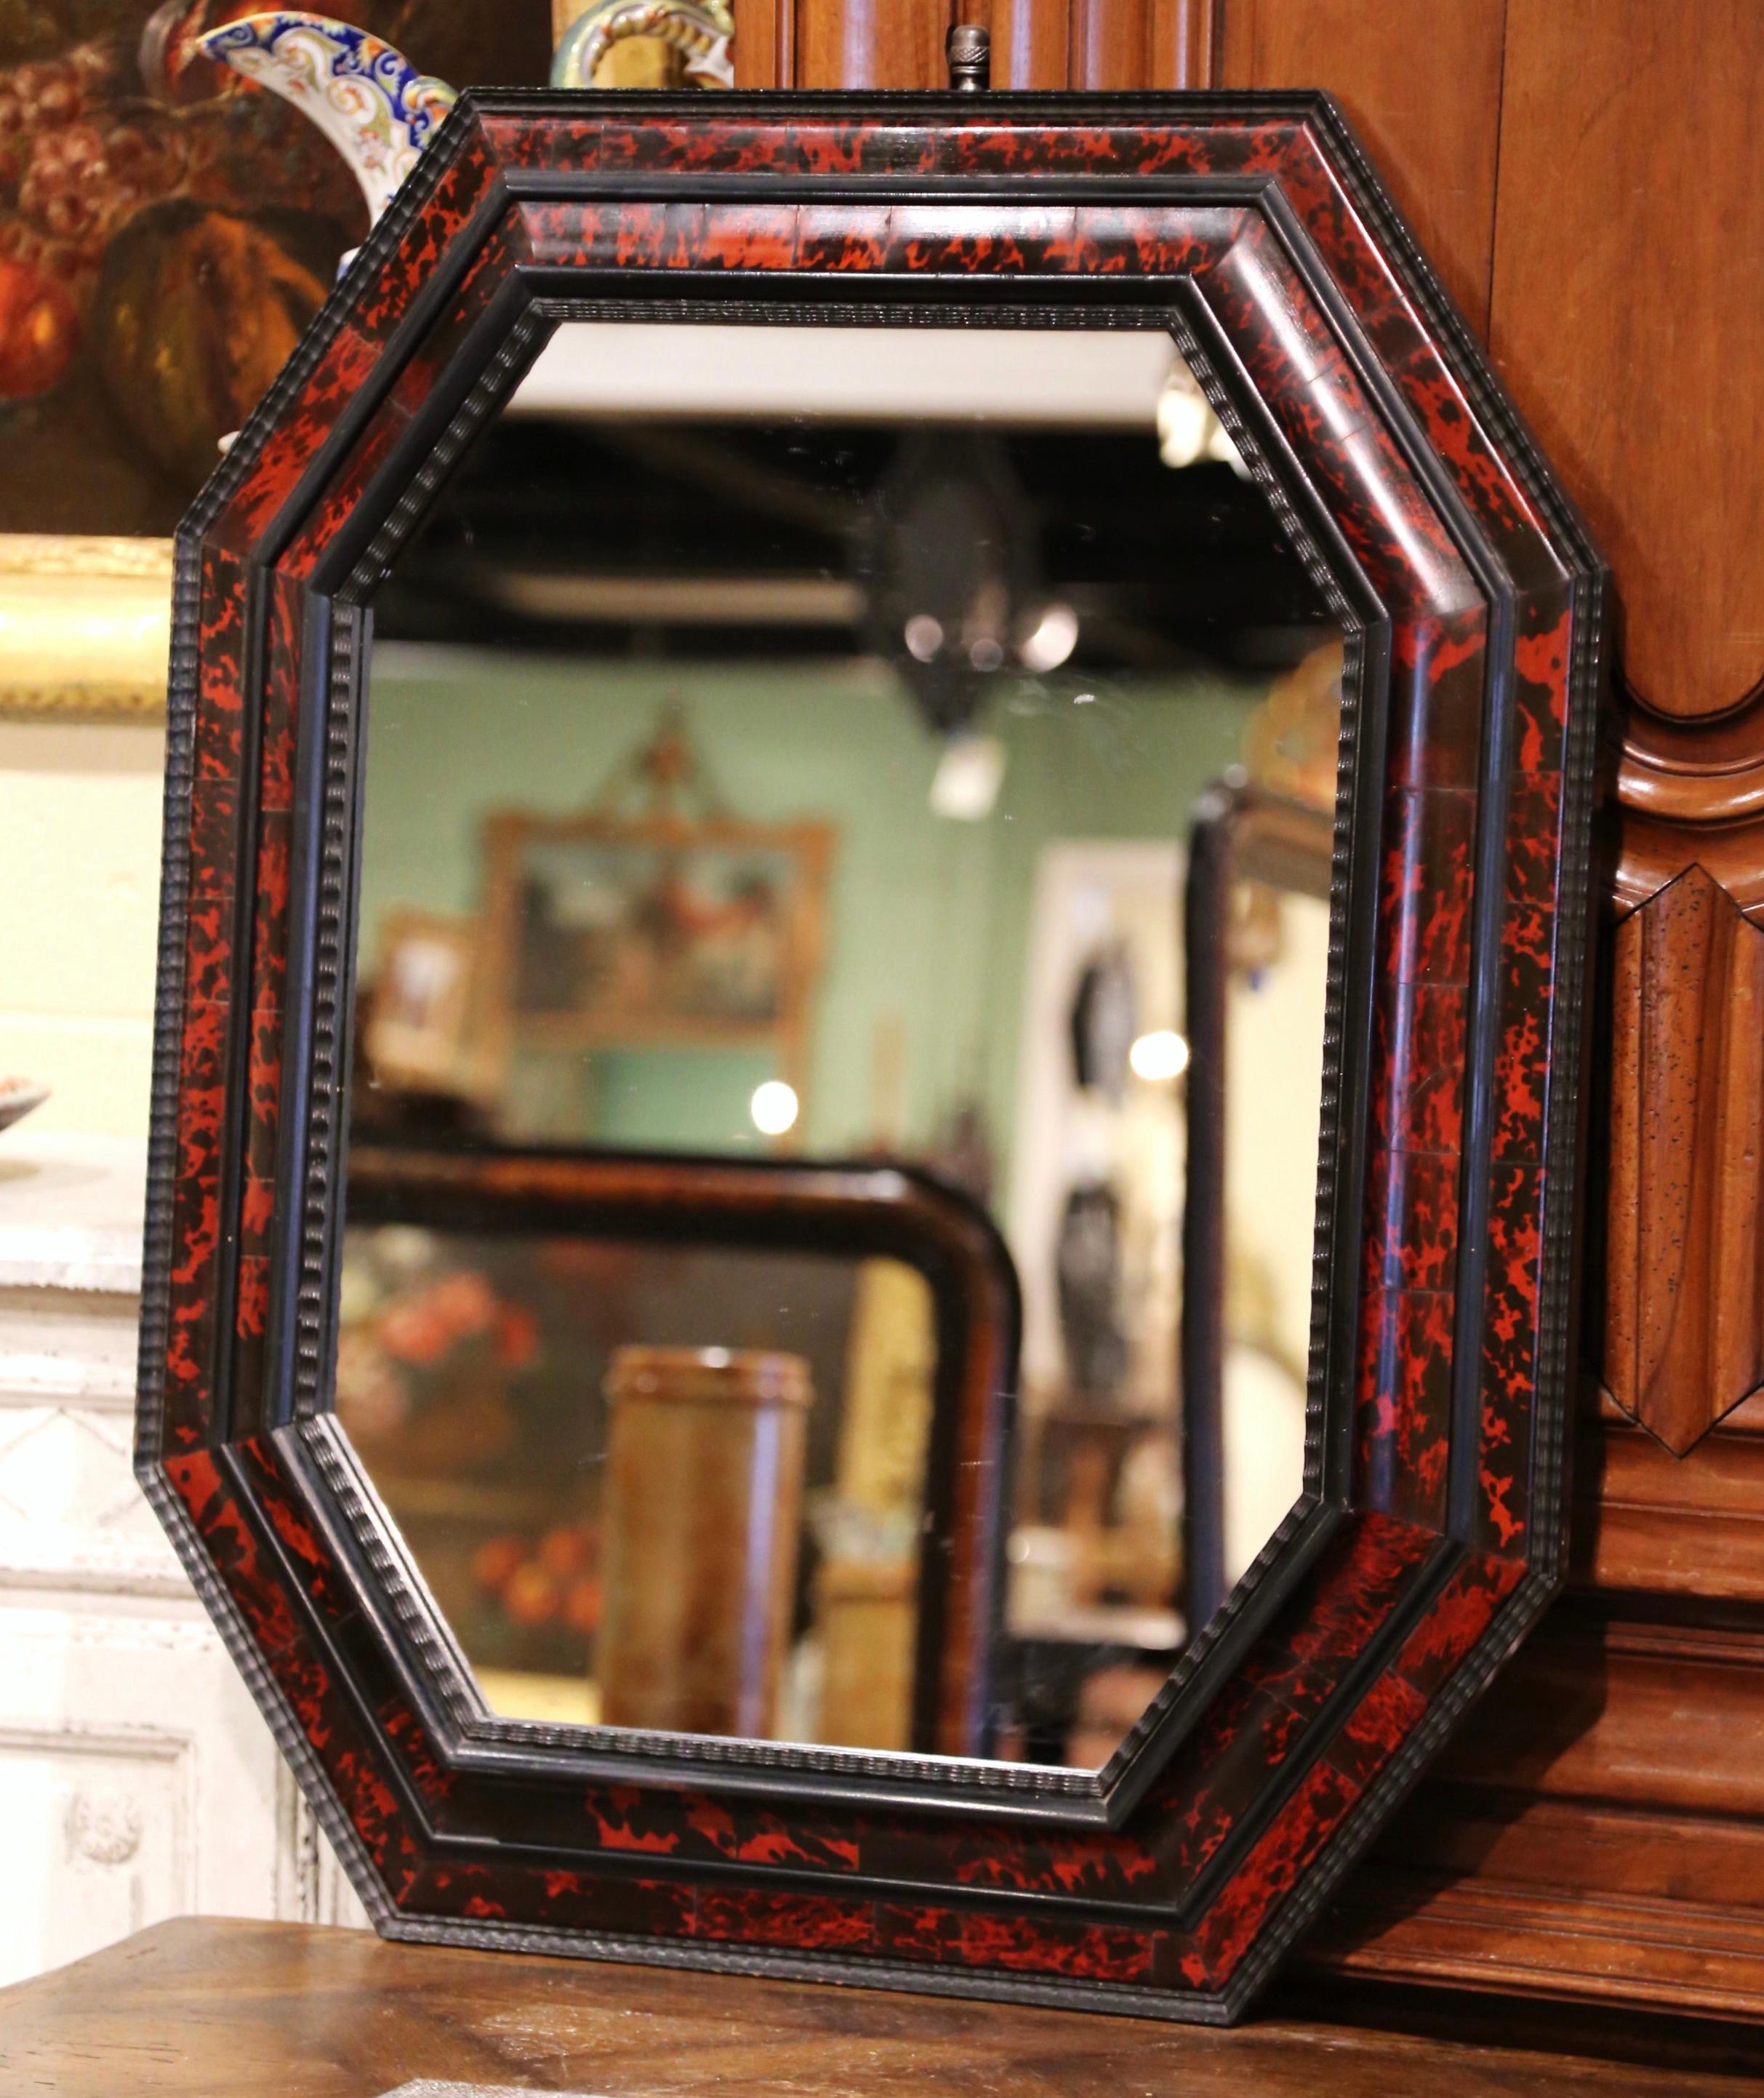 This elegant antique mirror in the style of Maison Jansen, was created in Paris, France circa 1950. Octagonal and overlay in shape, the Renaissance style mirror is decorated with faux tortoiseshell motifs around the frame. The wall piece is in